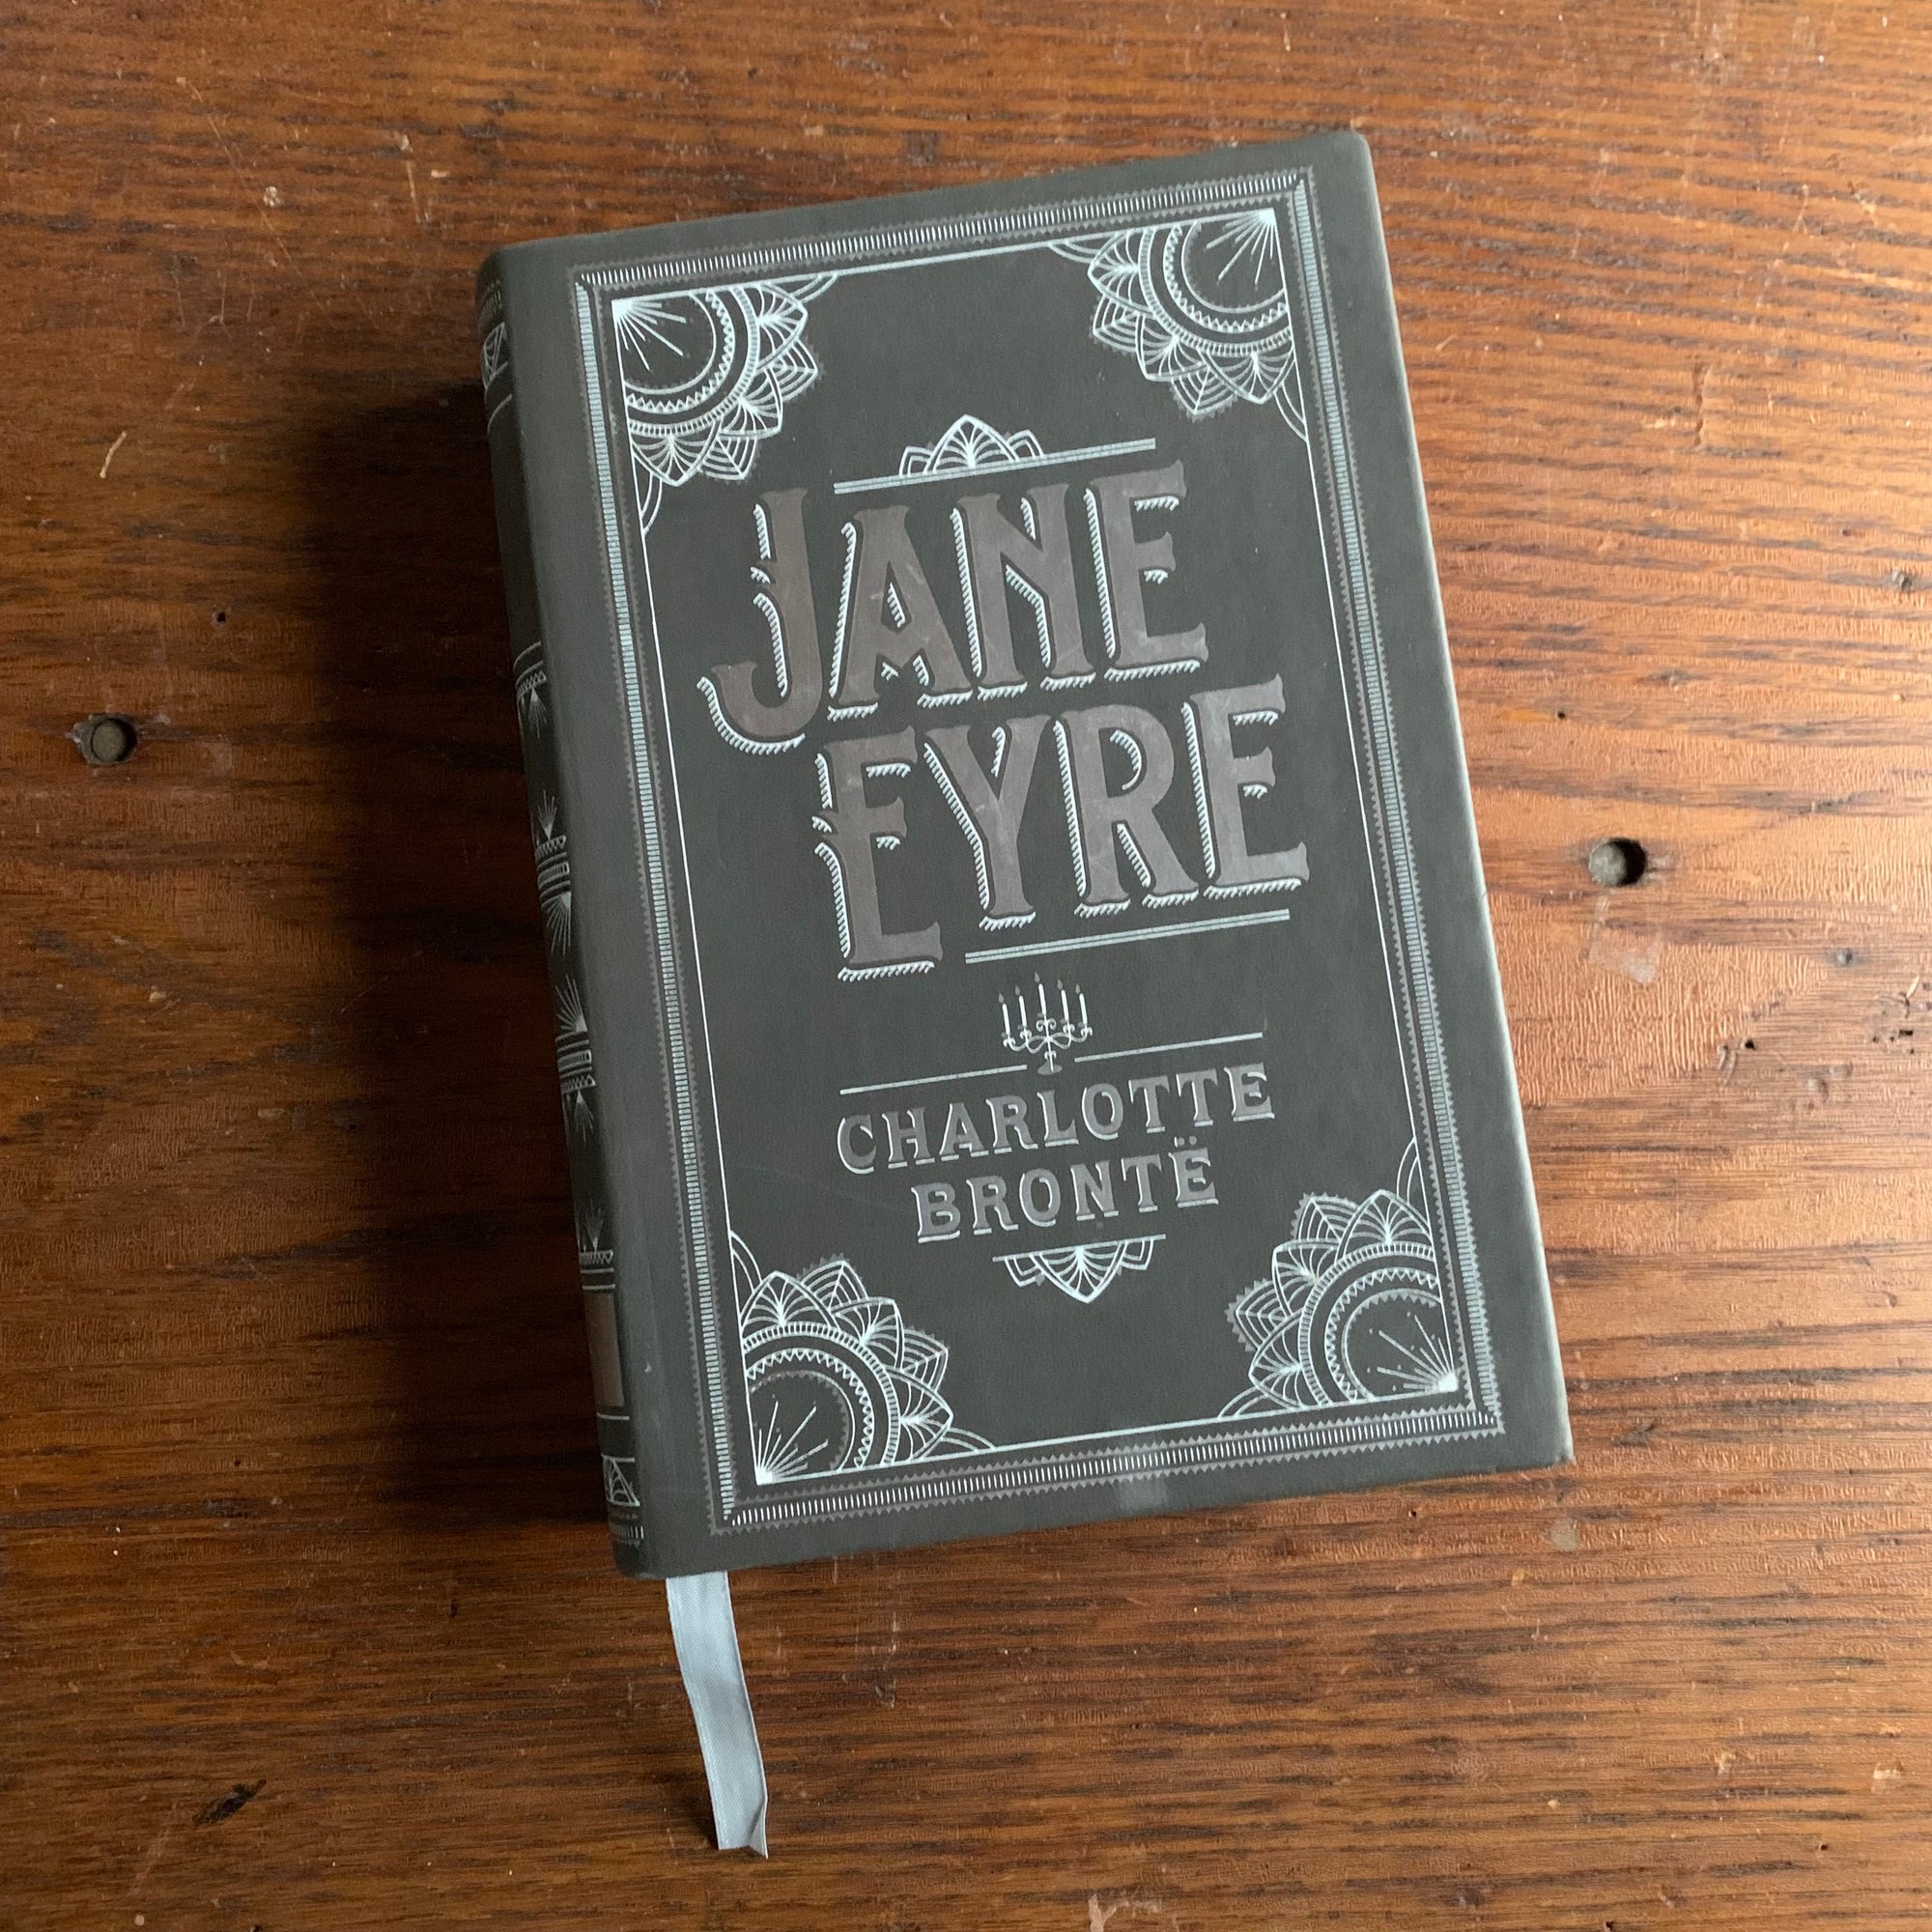 Jane Eyre by Charlotte Bronte - A 2016 Leather Bound Barnes and Noble Edition